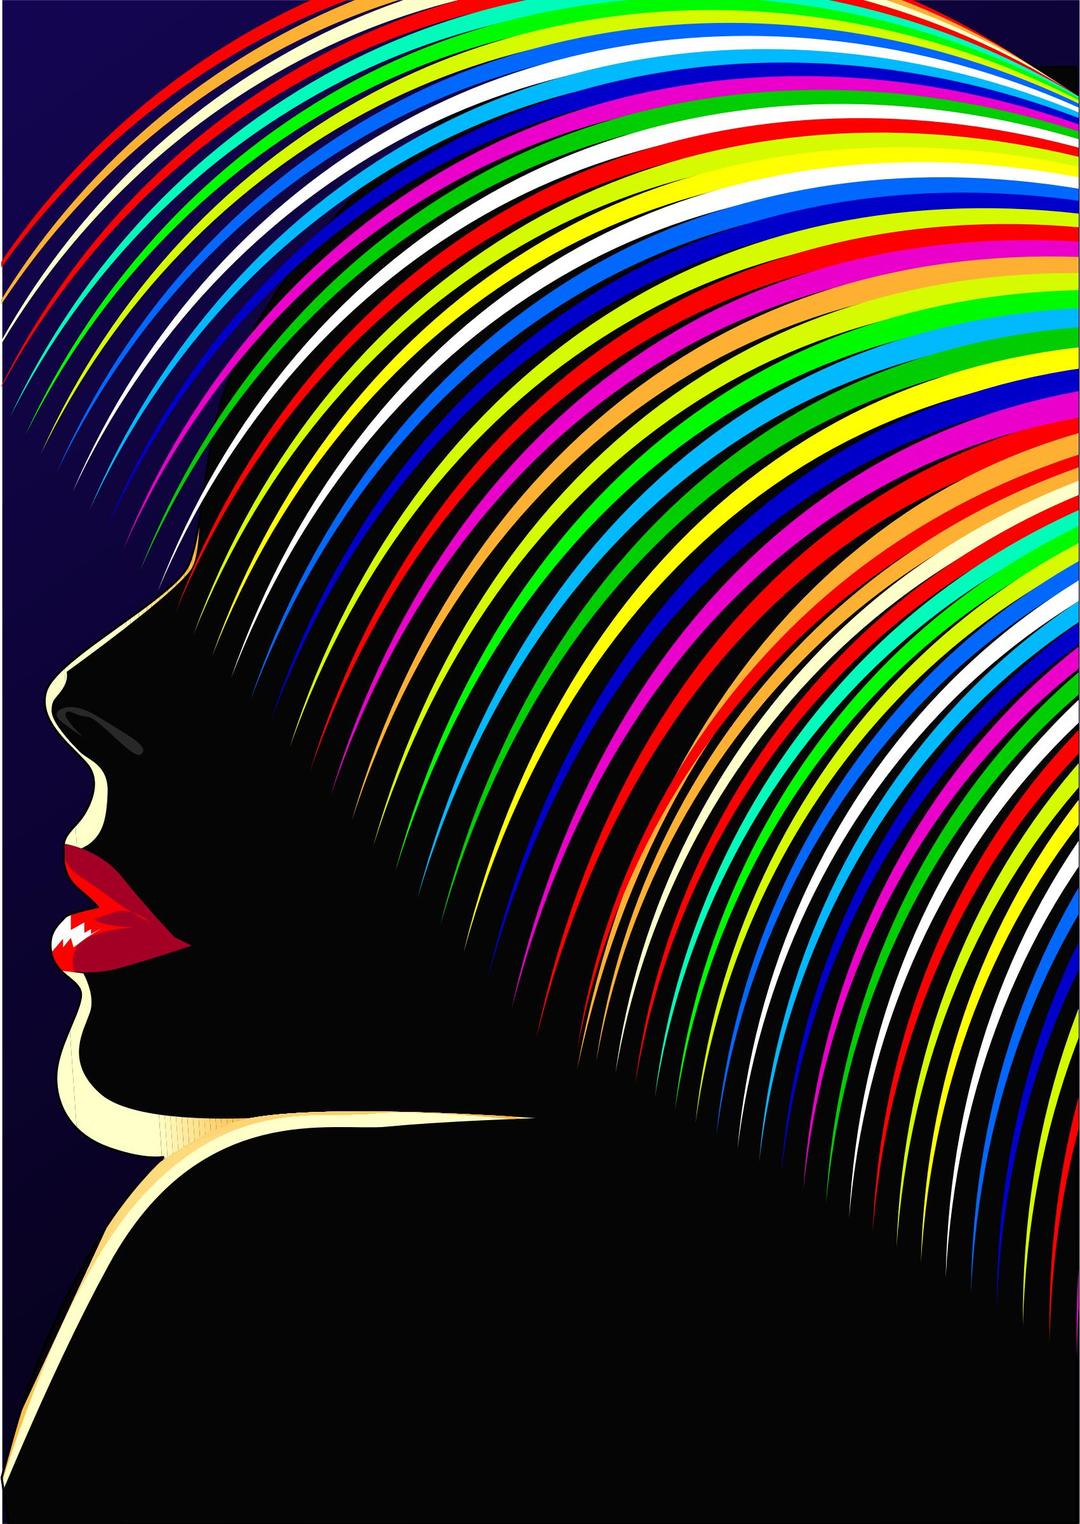 Rainbow Hair Woman Silhouette png transparent